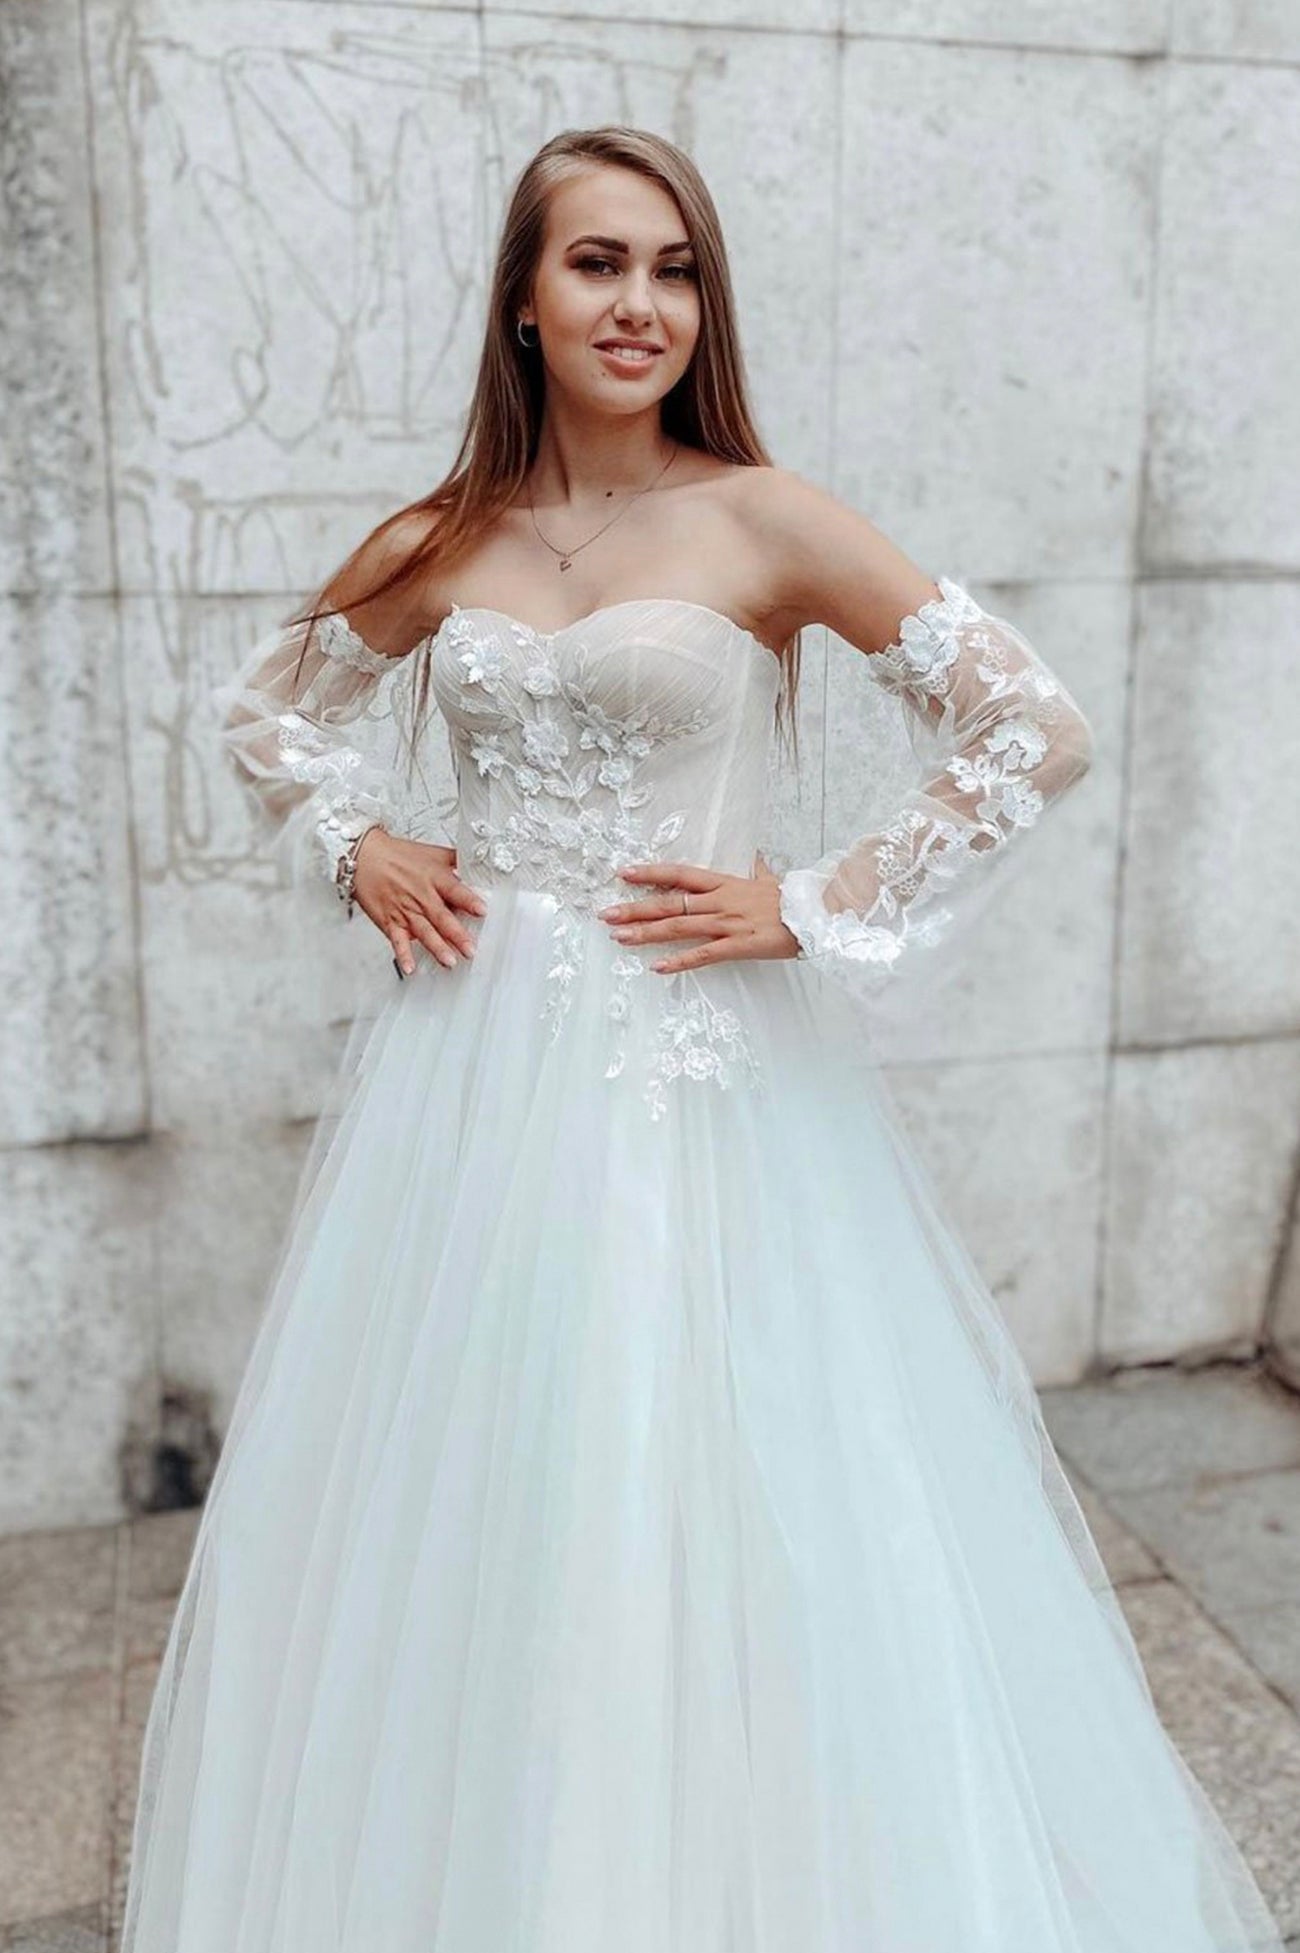 Plunging V-Neck Lace Long Prom Dress, White Long Sleeve Evening Party